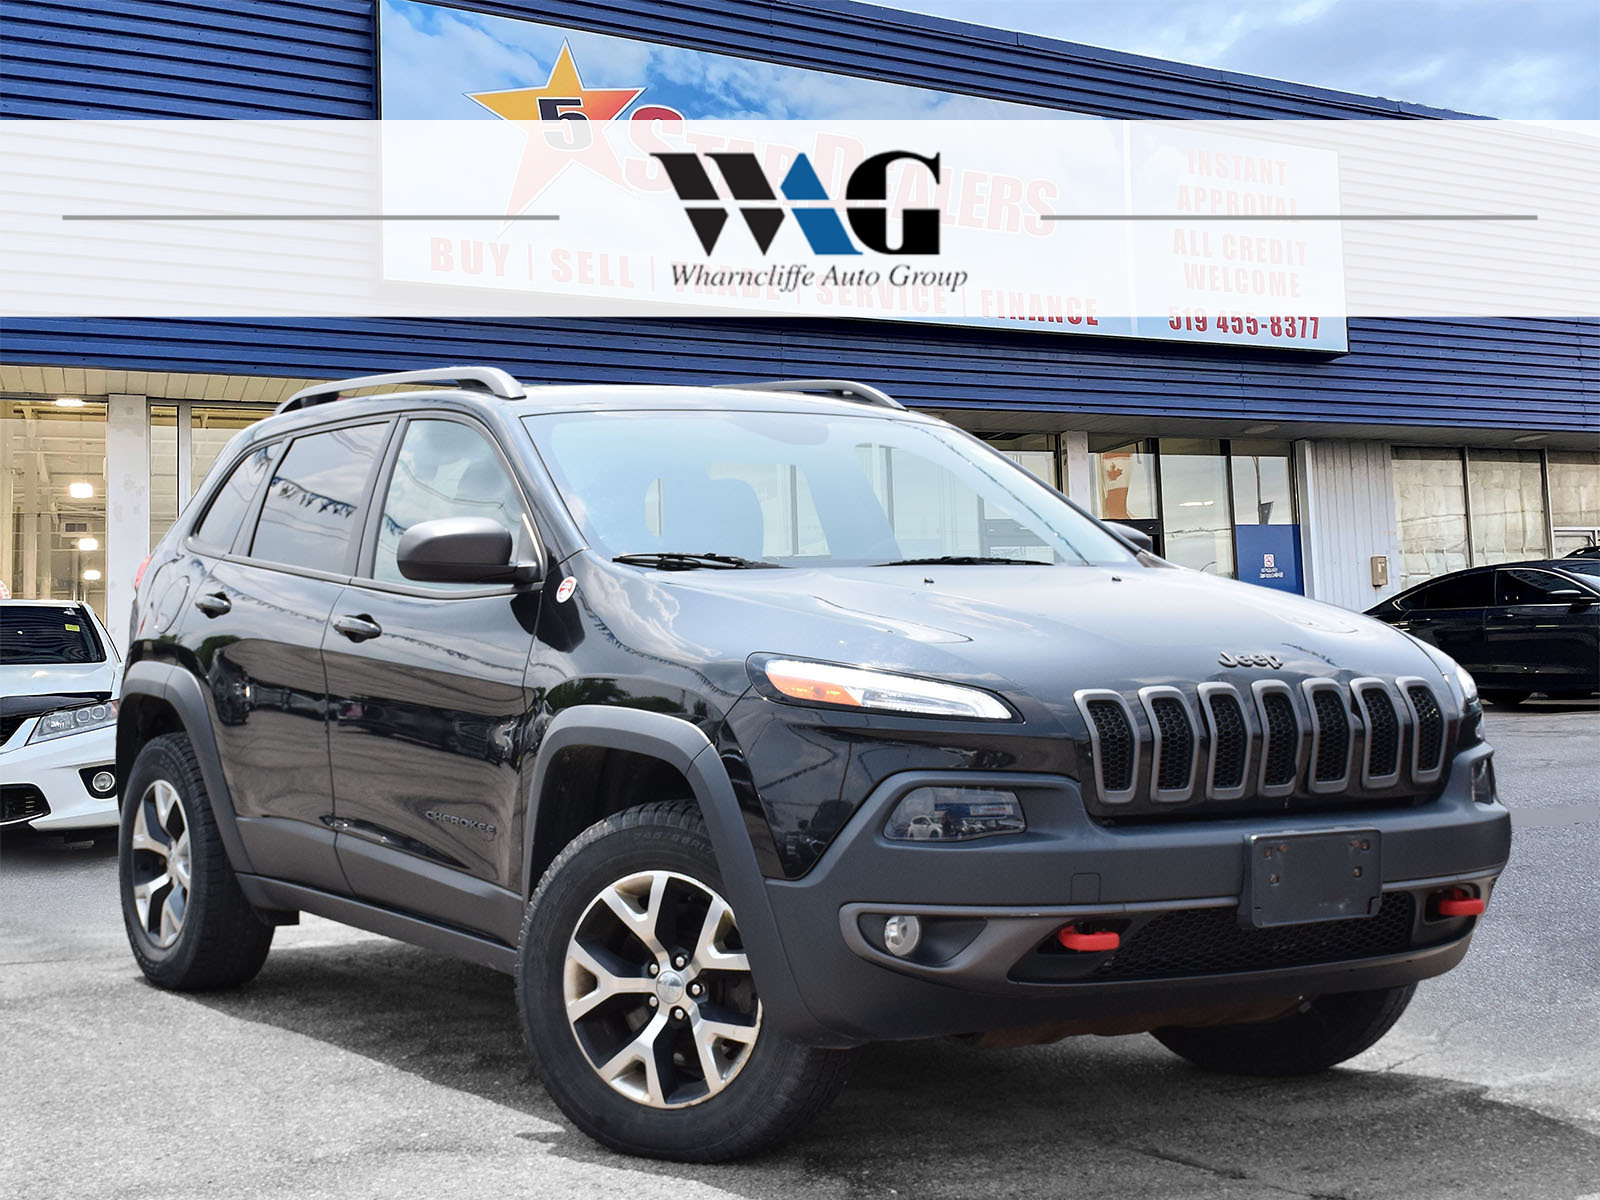 2016 Jeep Cherokee AWD LEATHER PANOROOF MINT! WE FINANCE ALL CREDIT